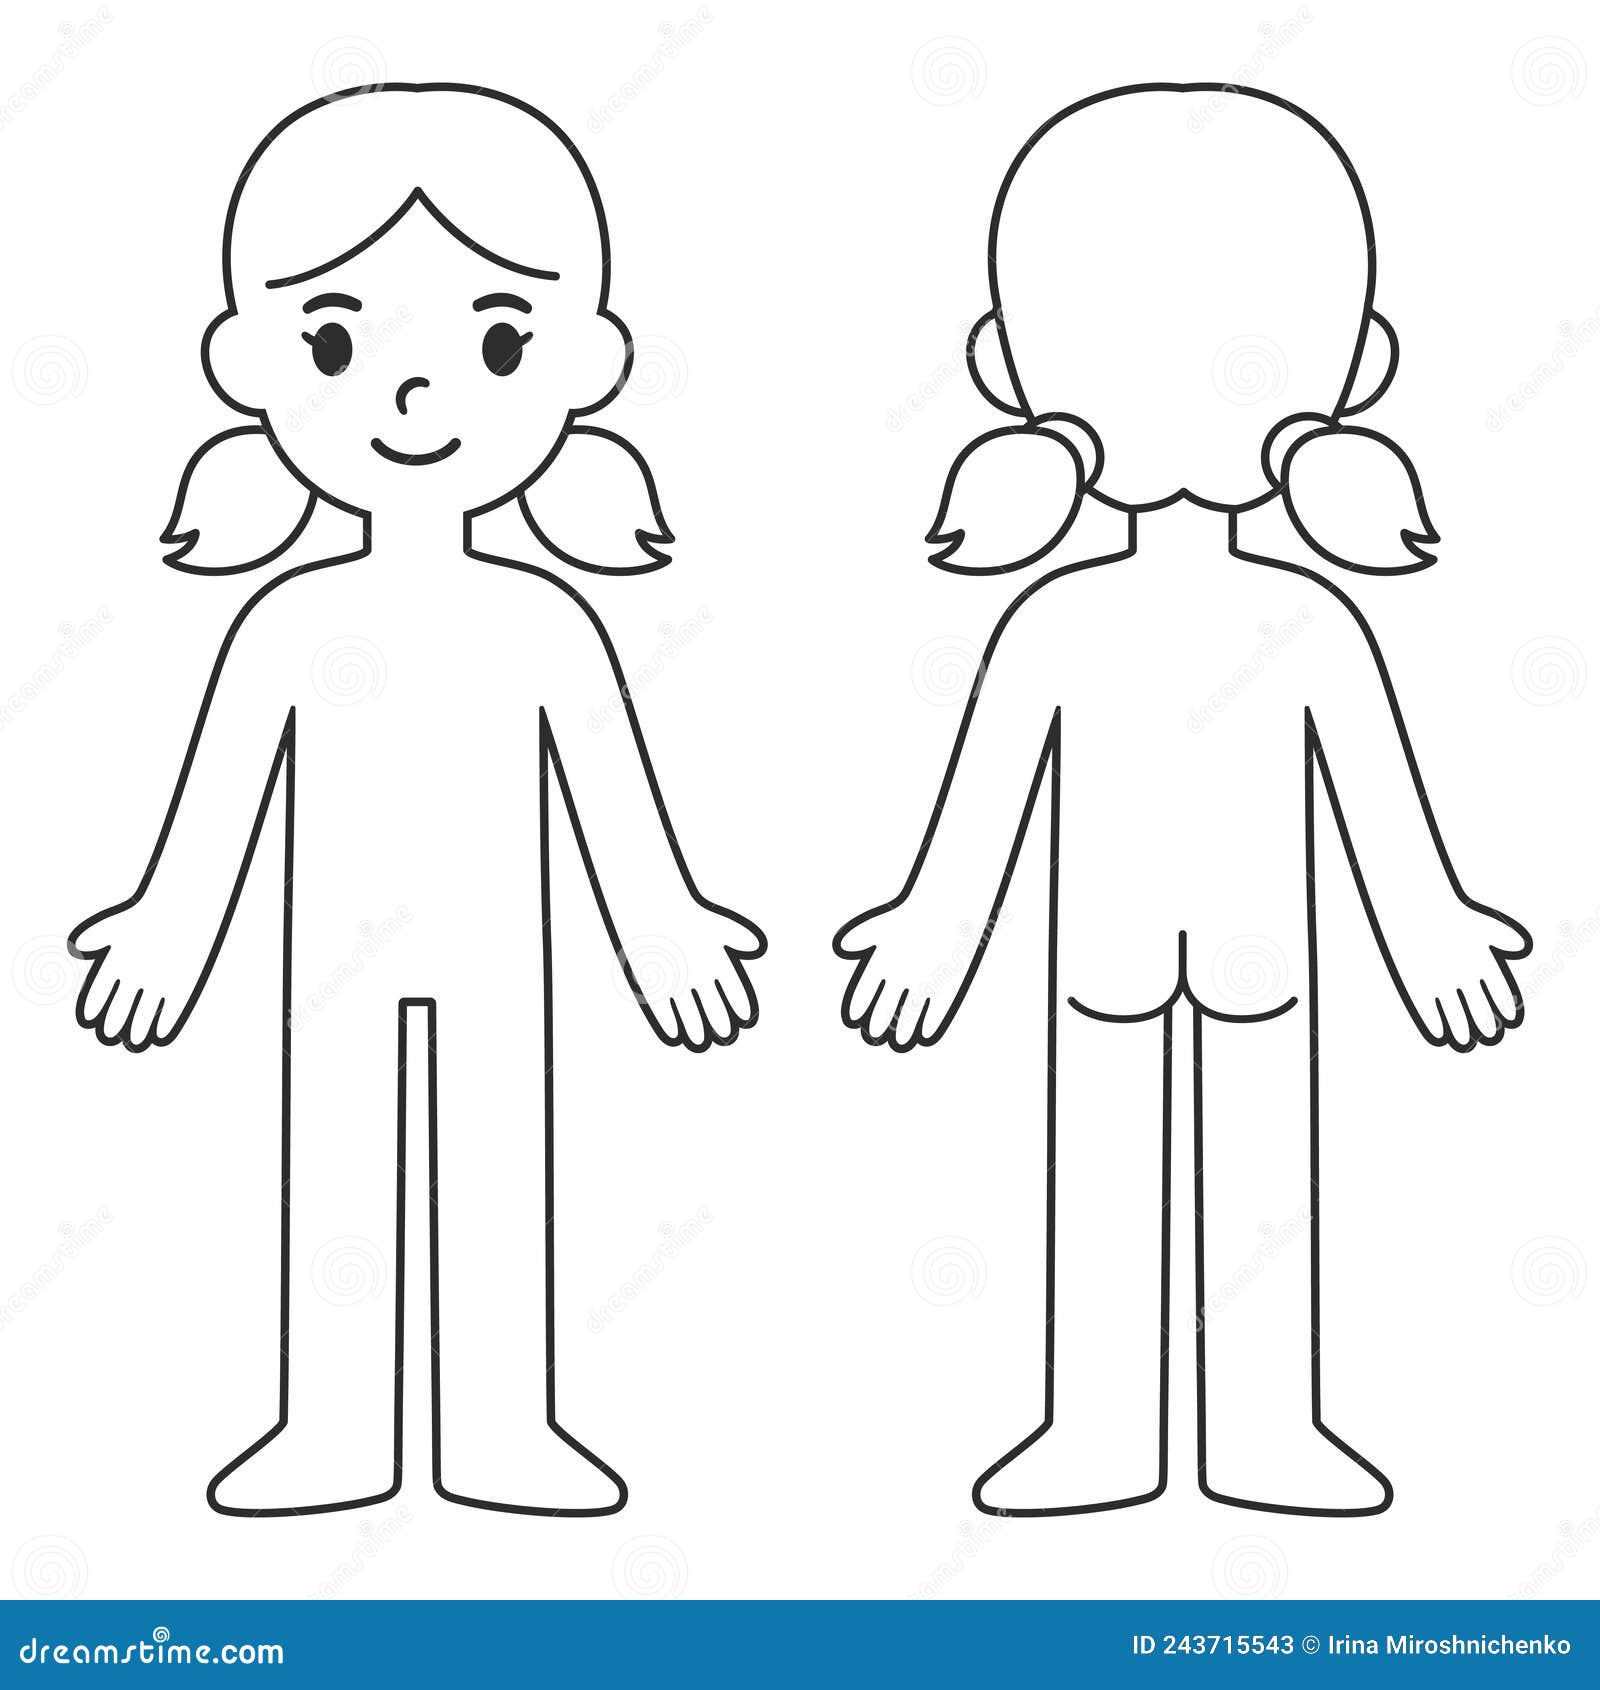 Child body template stock vector. Illustration of human - 243715543